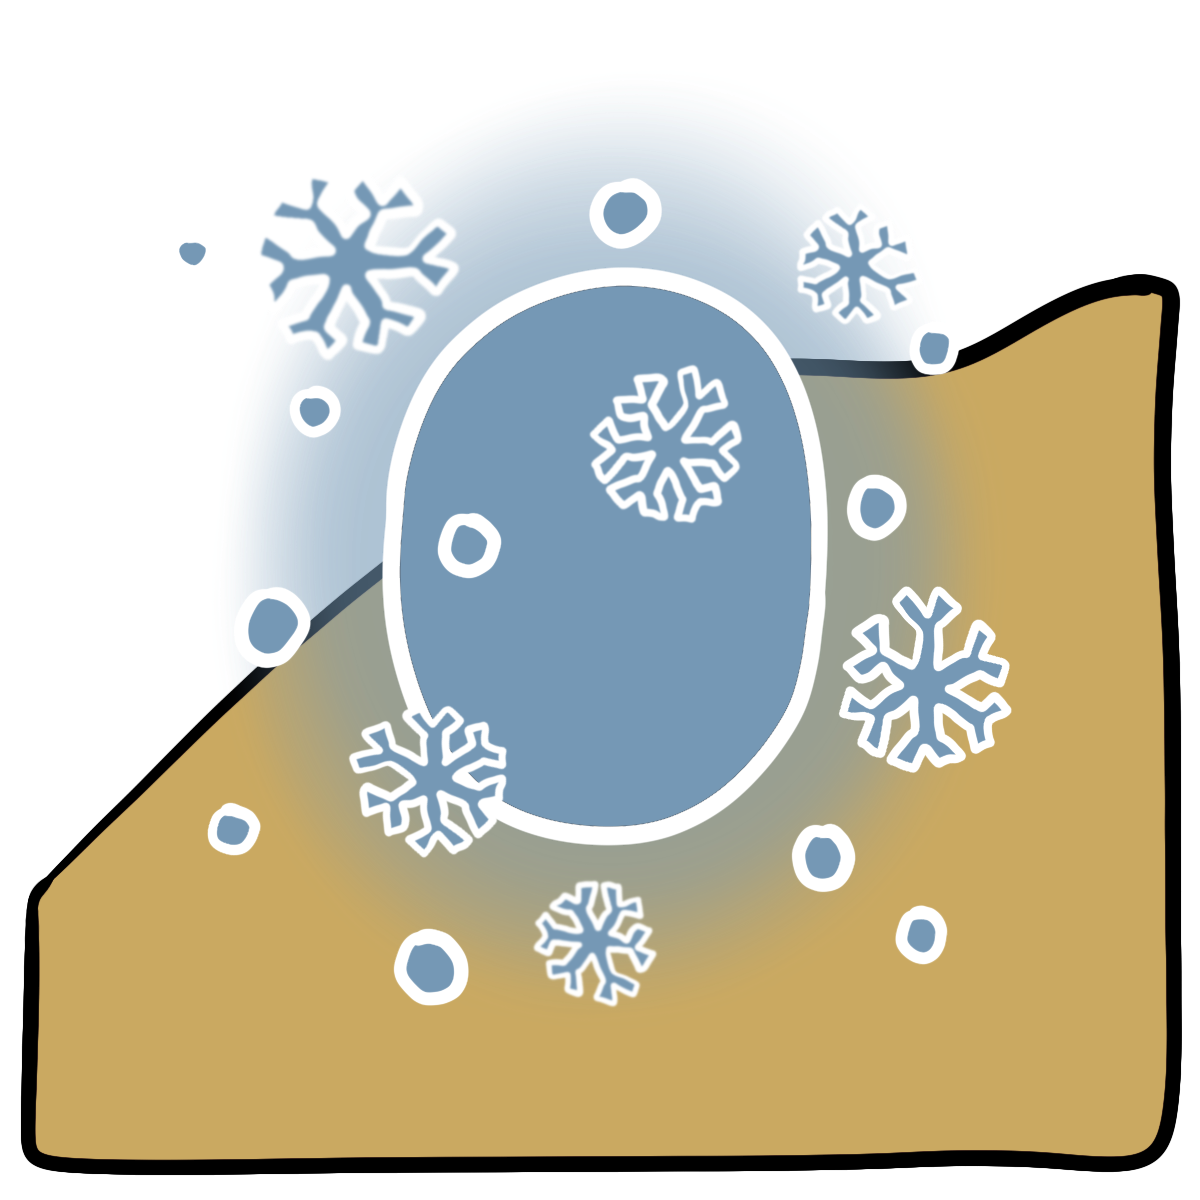 Light blue oval with snowflakes around it. Curved yellow skin fills the bottom half of the background.